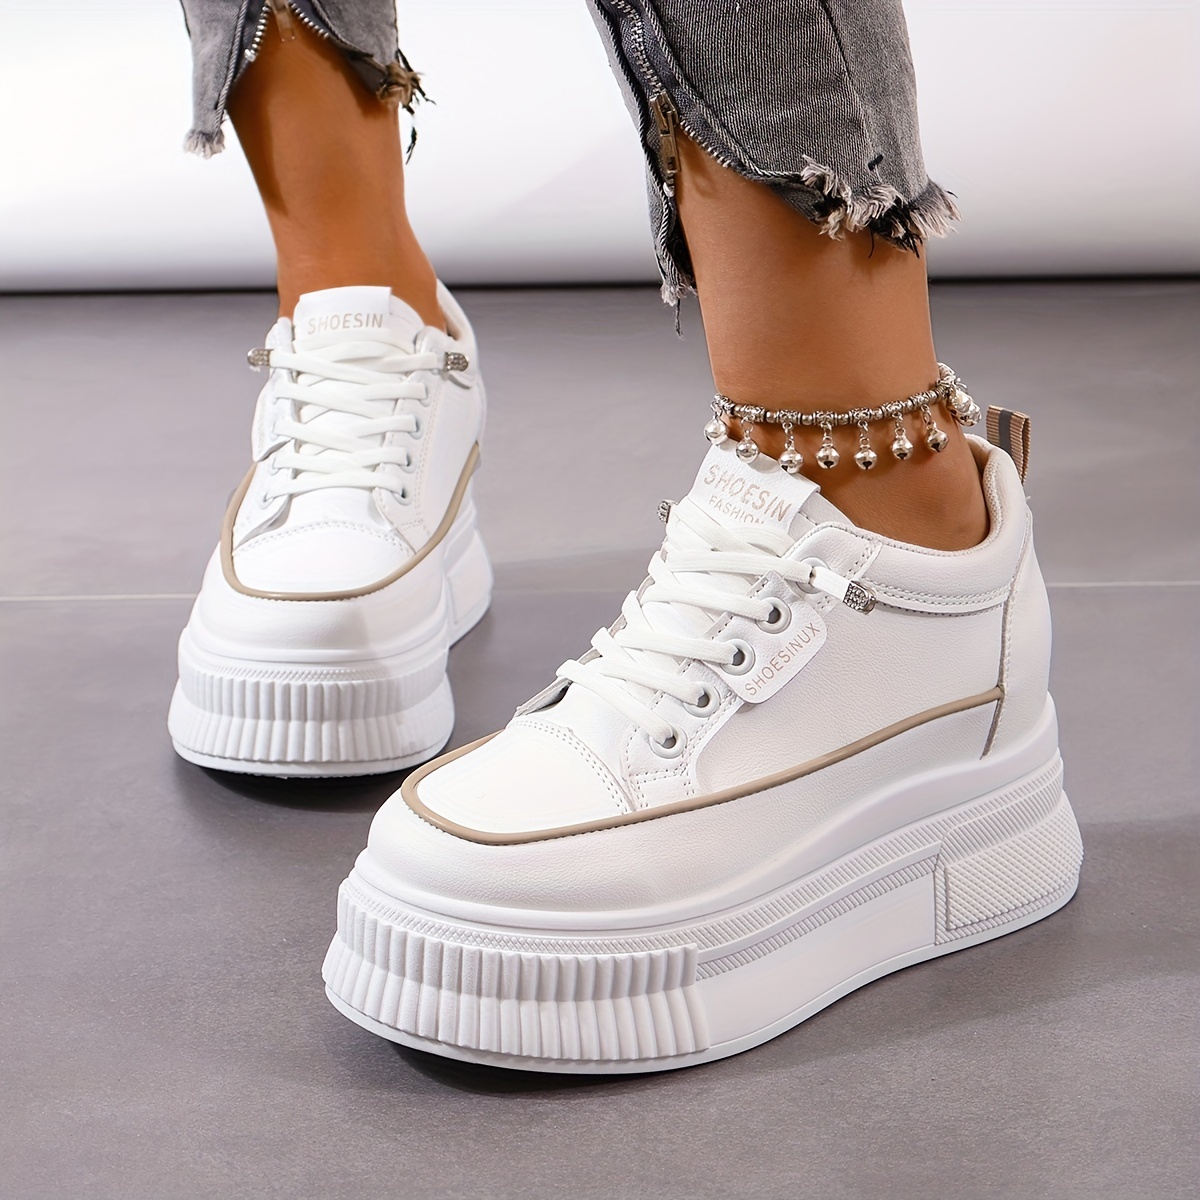 Women's Waterproof Non Slip Lace Up Sneakers, Low Top Thick Soled Platform  Walking Shoes, Fashion Height Increased Casual Sneakers